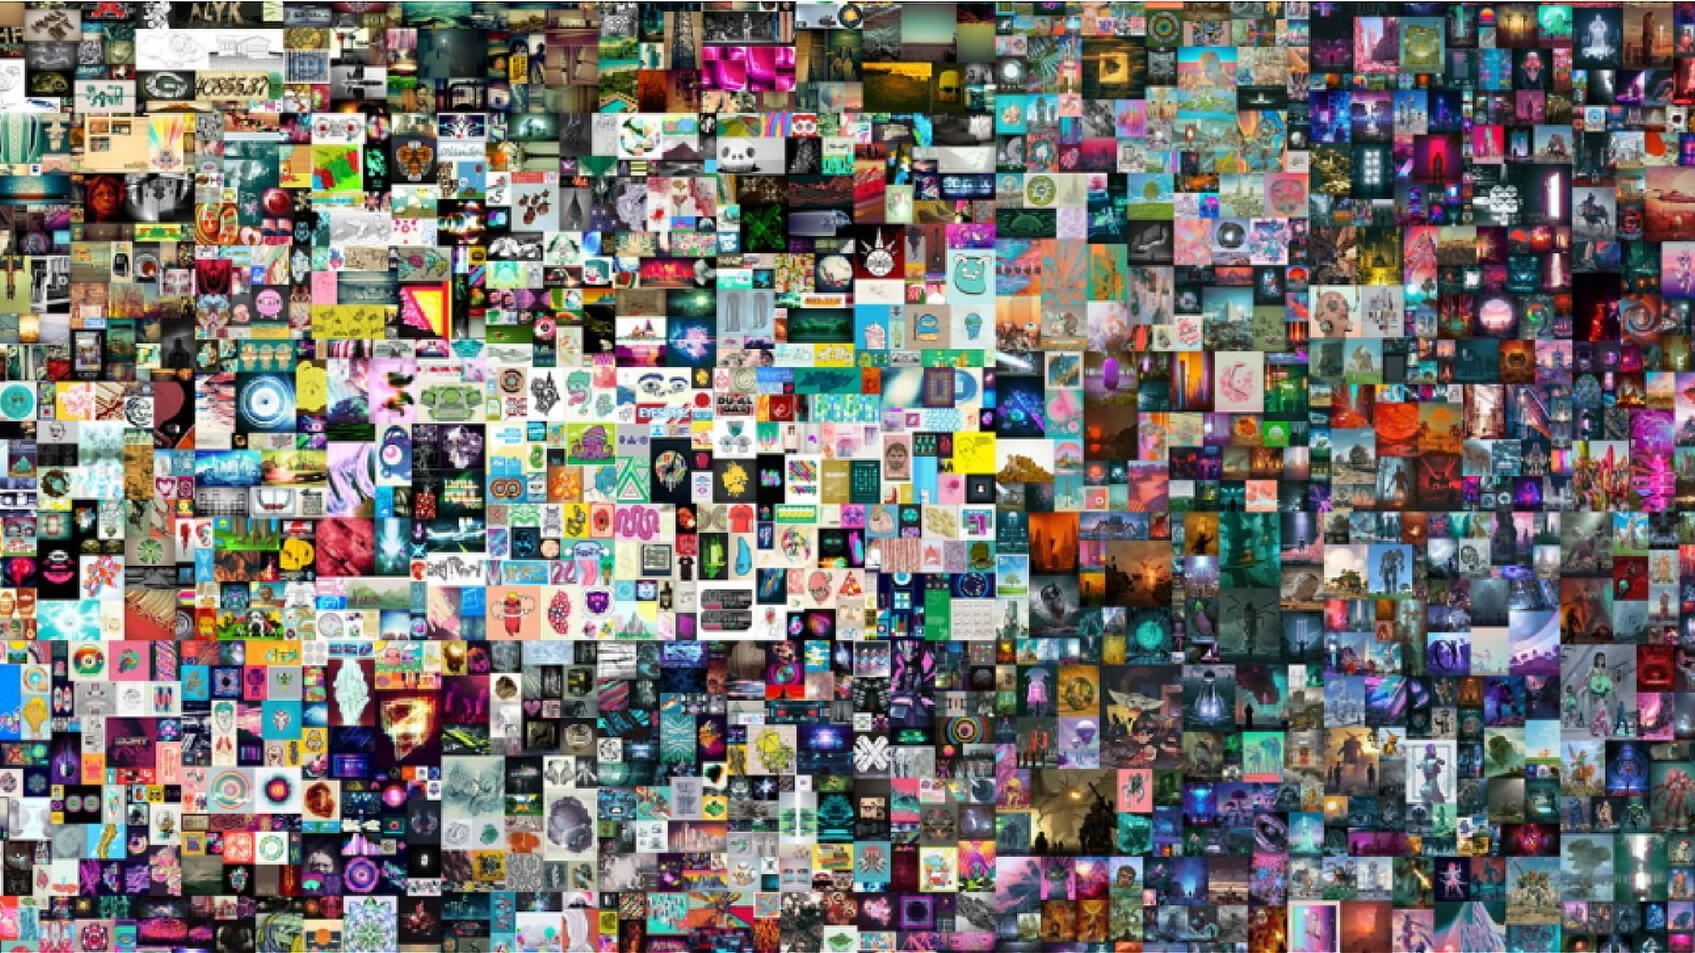  A grid of 5000 images created by Beeple, representing every day from May 1, 2007 to January 7, 2021.